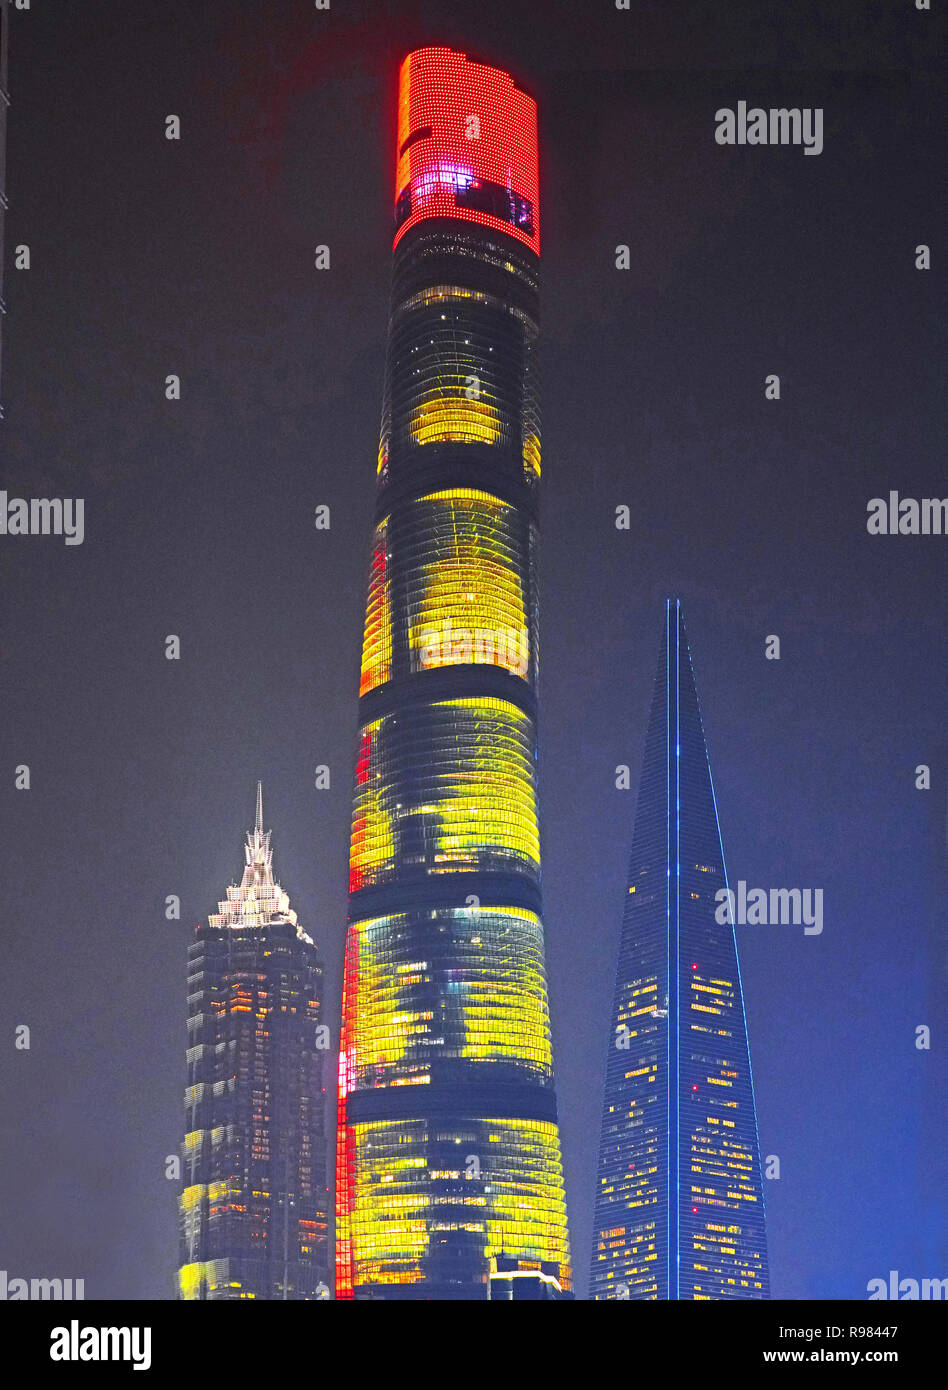 Skyscrapers in Pudong financial district of Shanghai at night include, from left to right: Jinmao Tower, Shanghai Tower, and World Financial Center Stock Photo